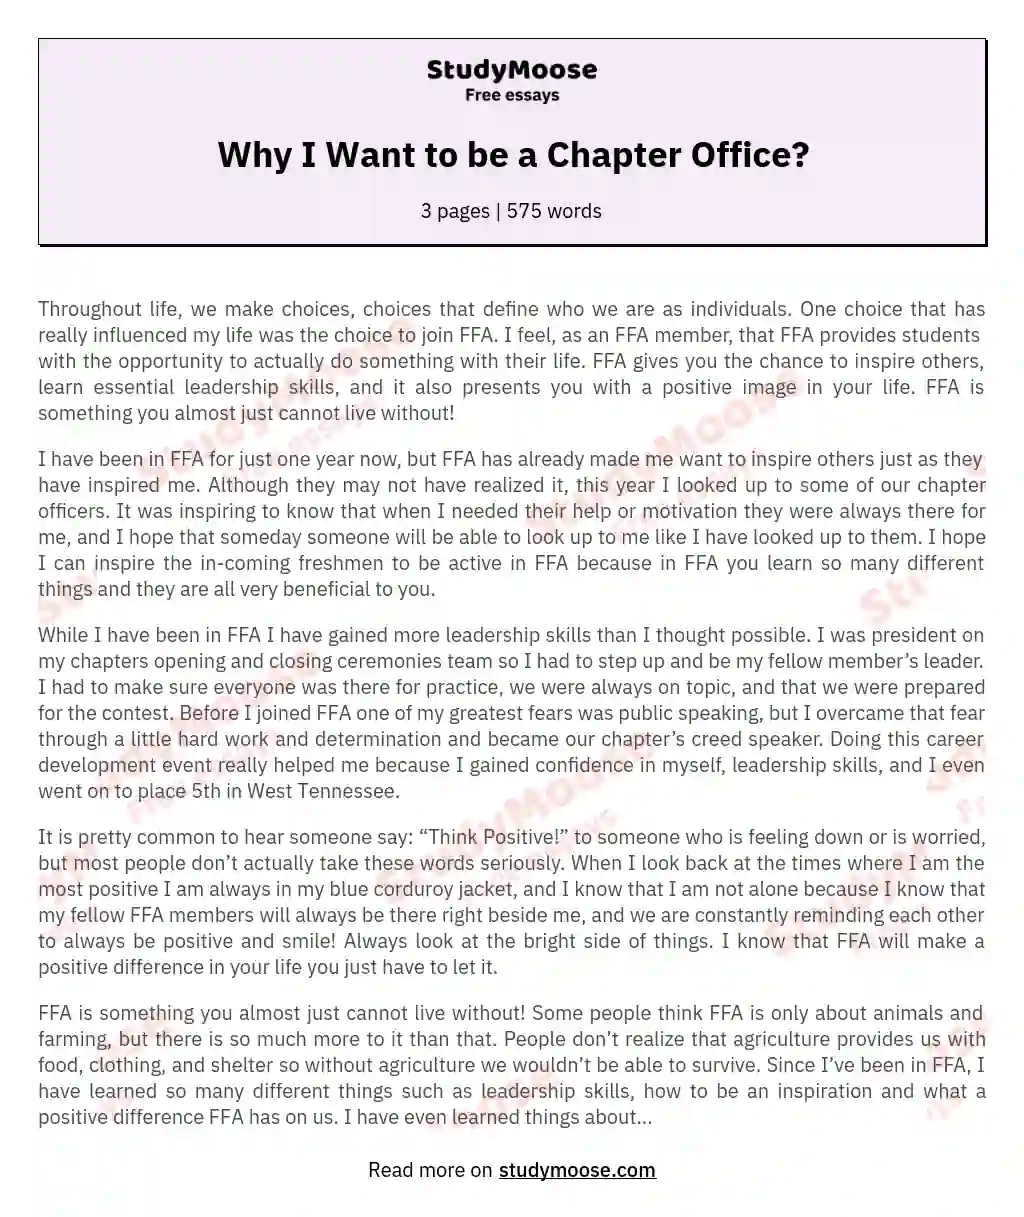 Why I Want to be a Chapter Office? essay